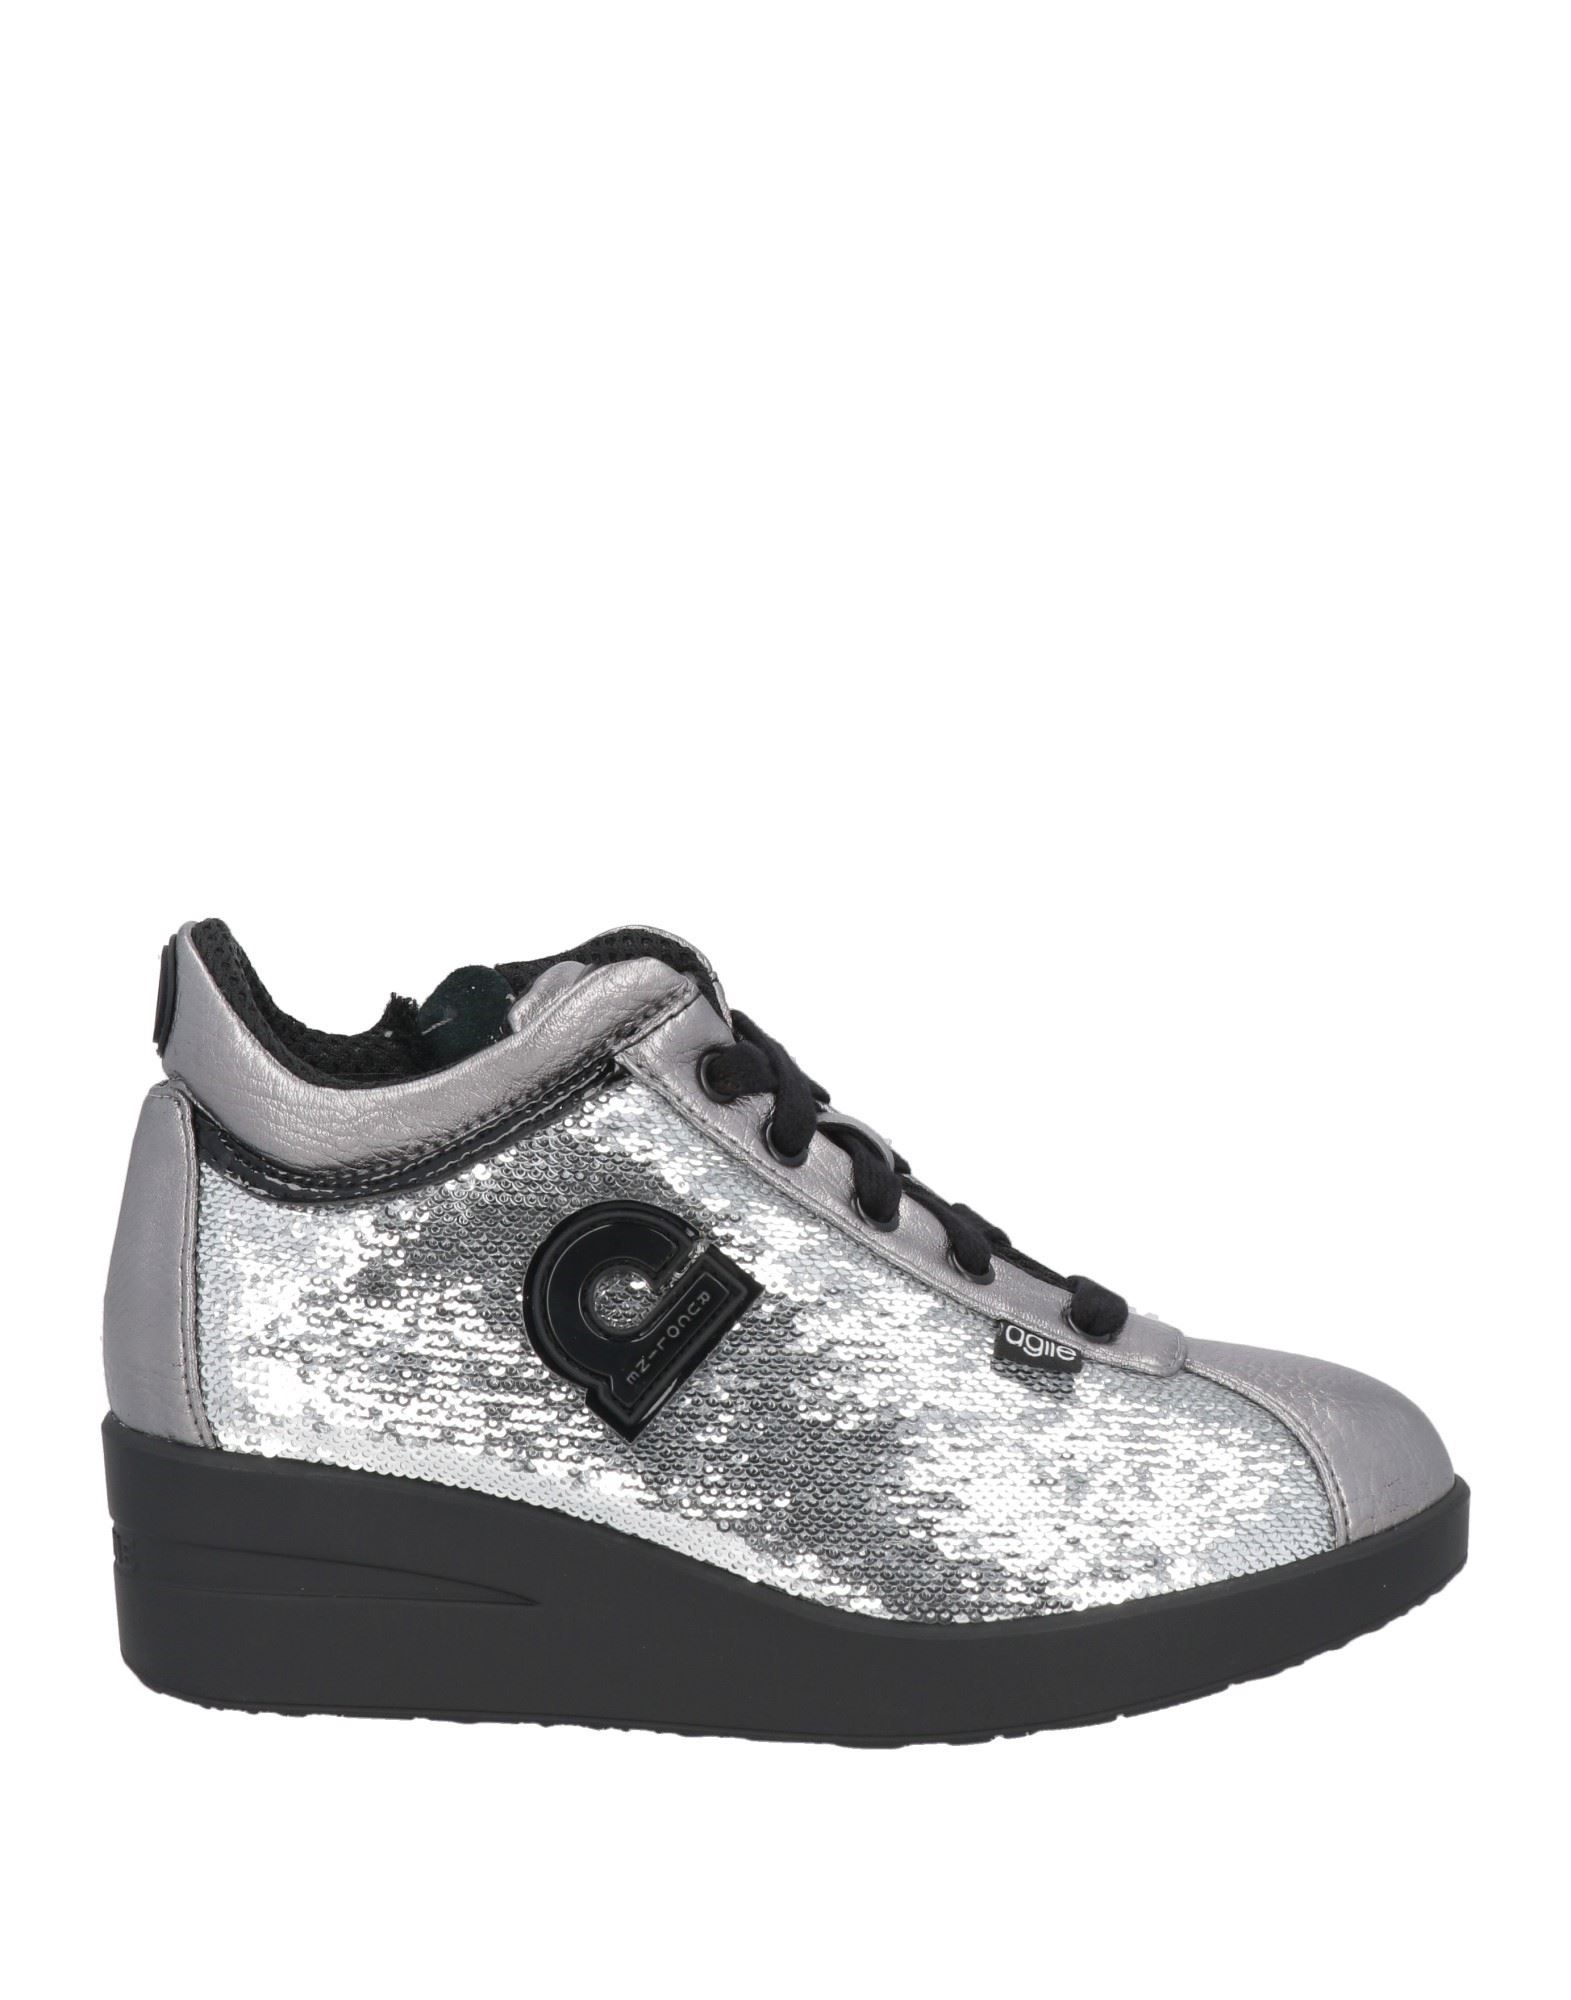 AGILE by RUCOLINE Sneakers Damen Silber von AGILE by RUCOLINE